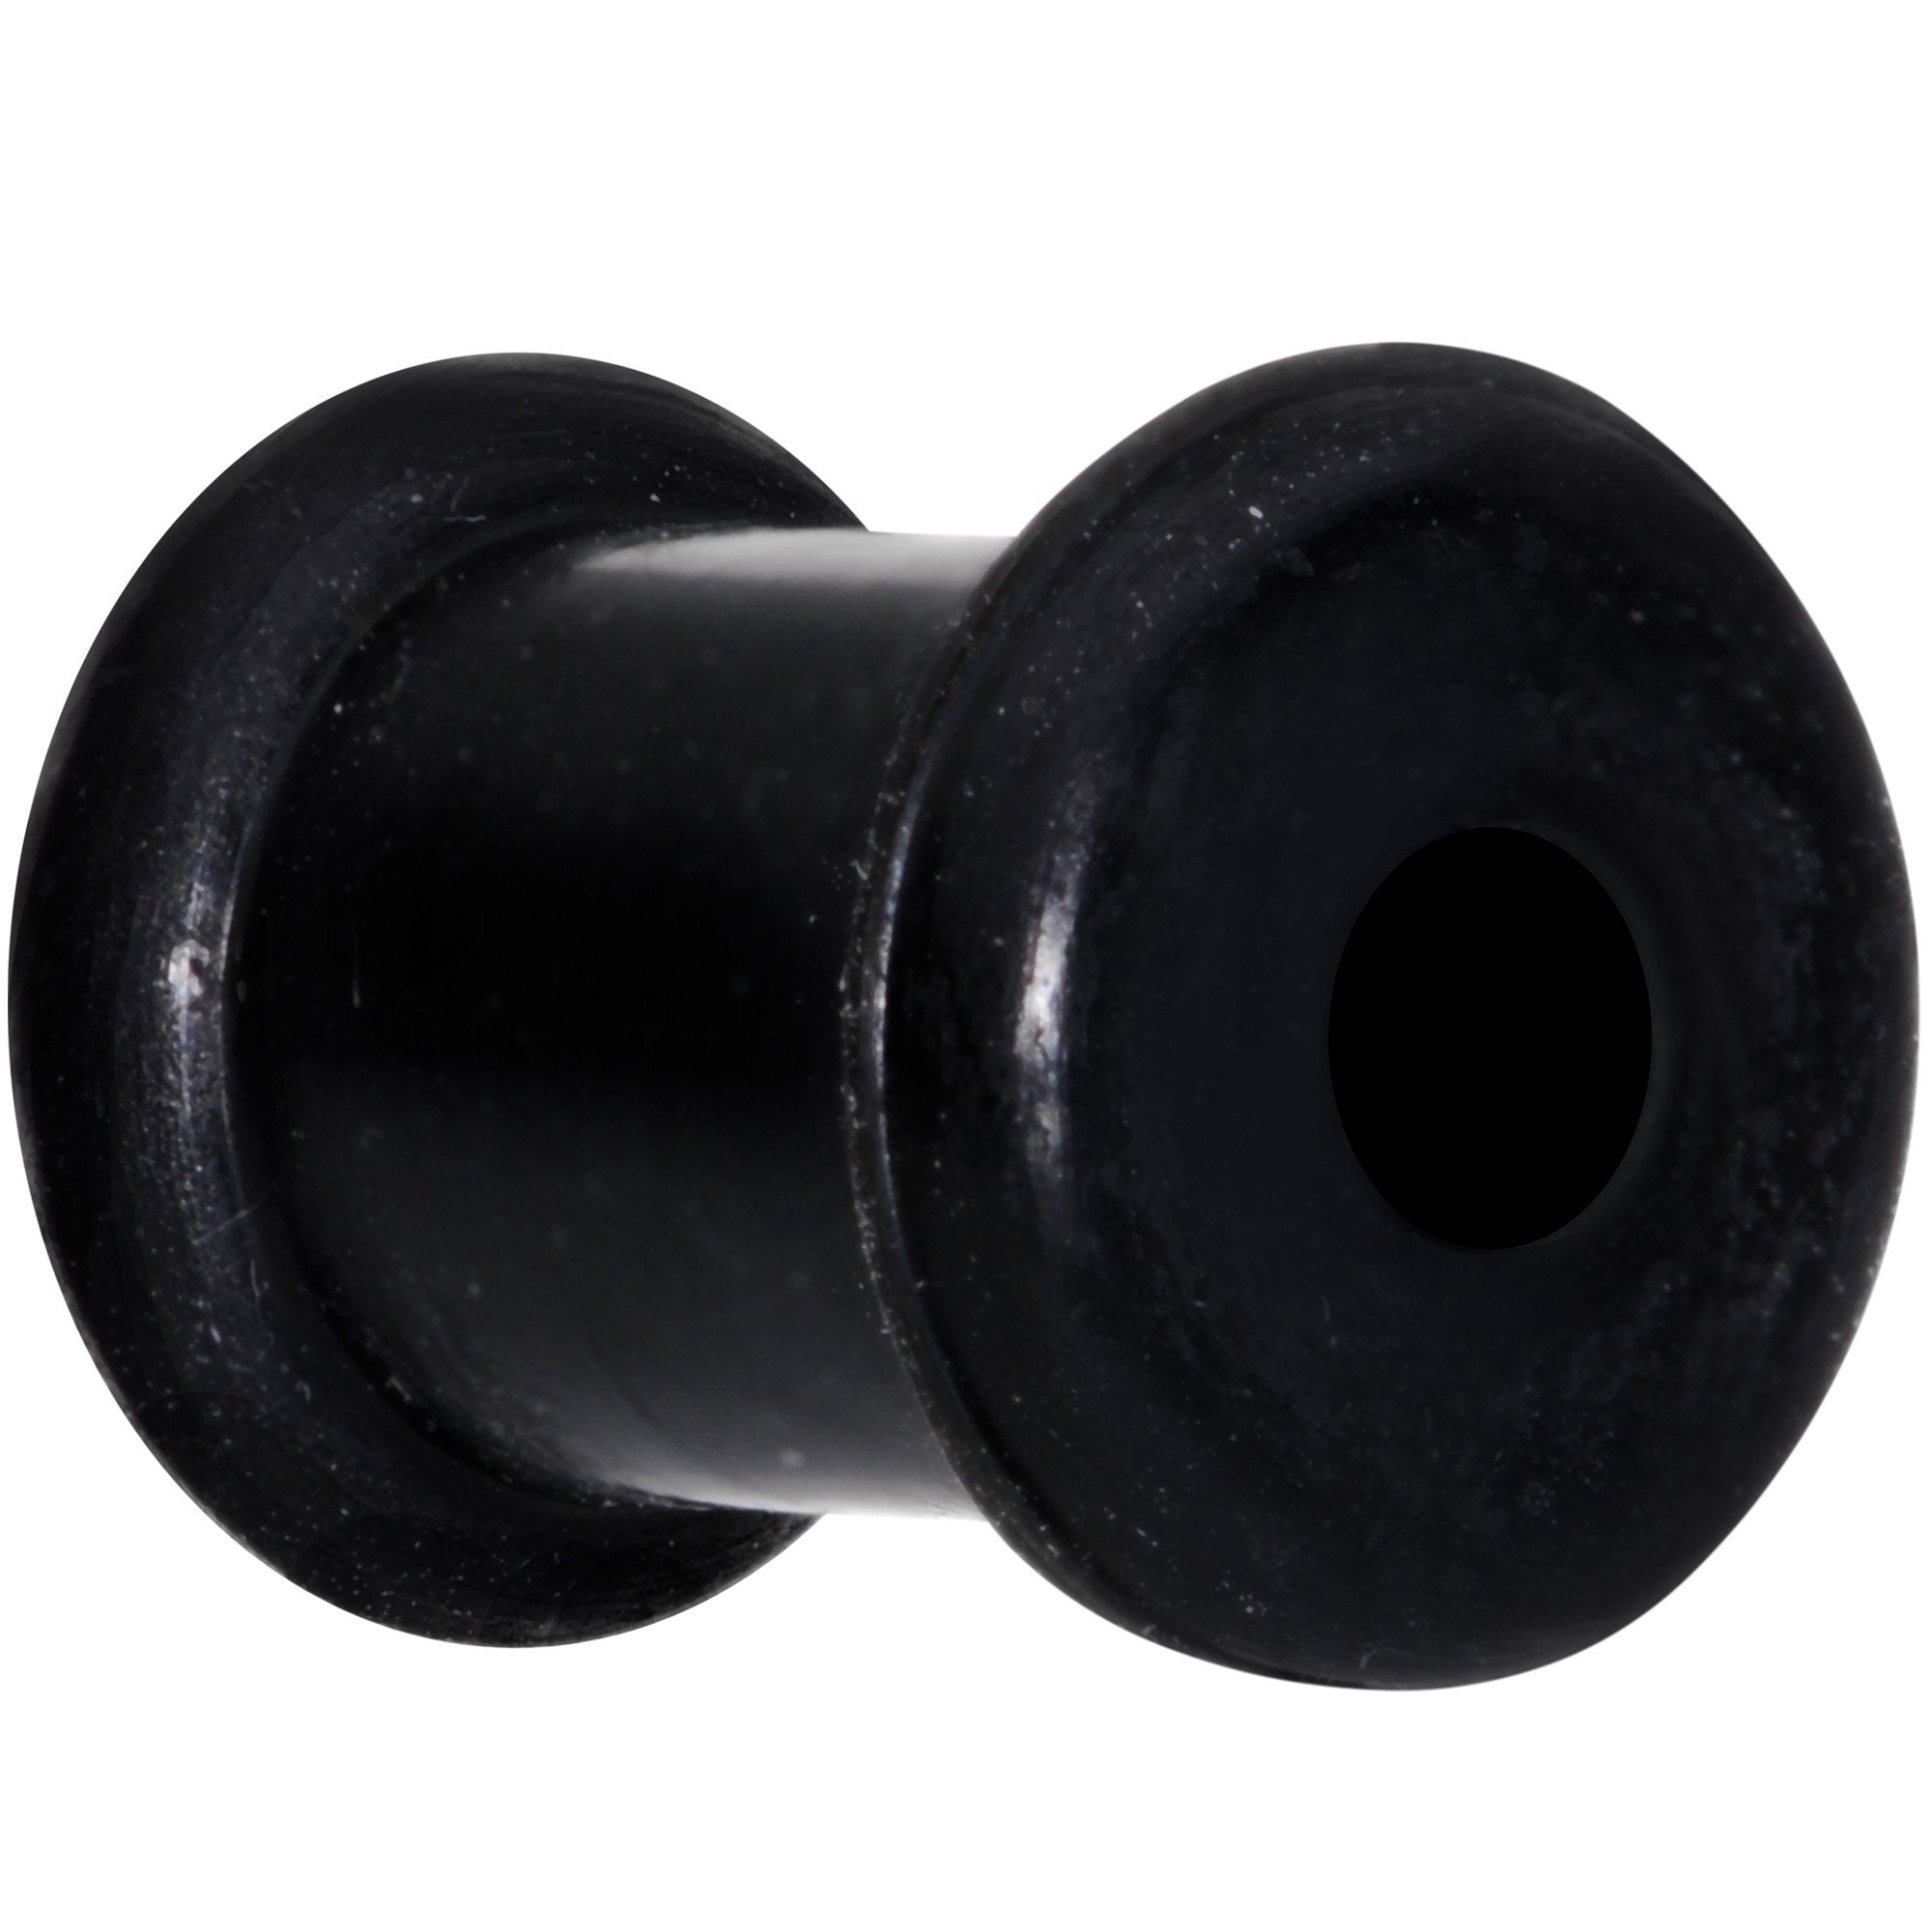 2 Gauge Black Double Flare Silicone Flexible Tunnel Set